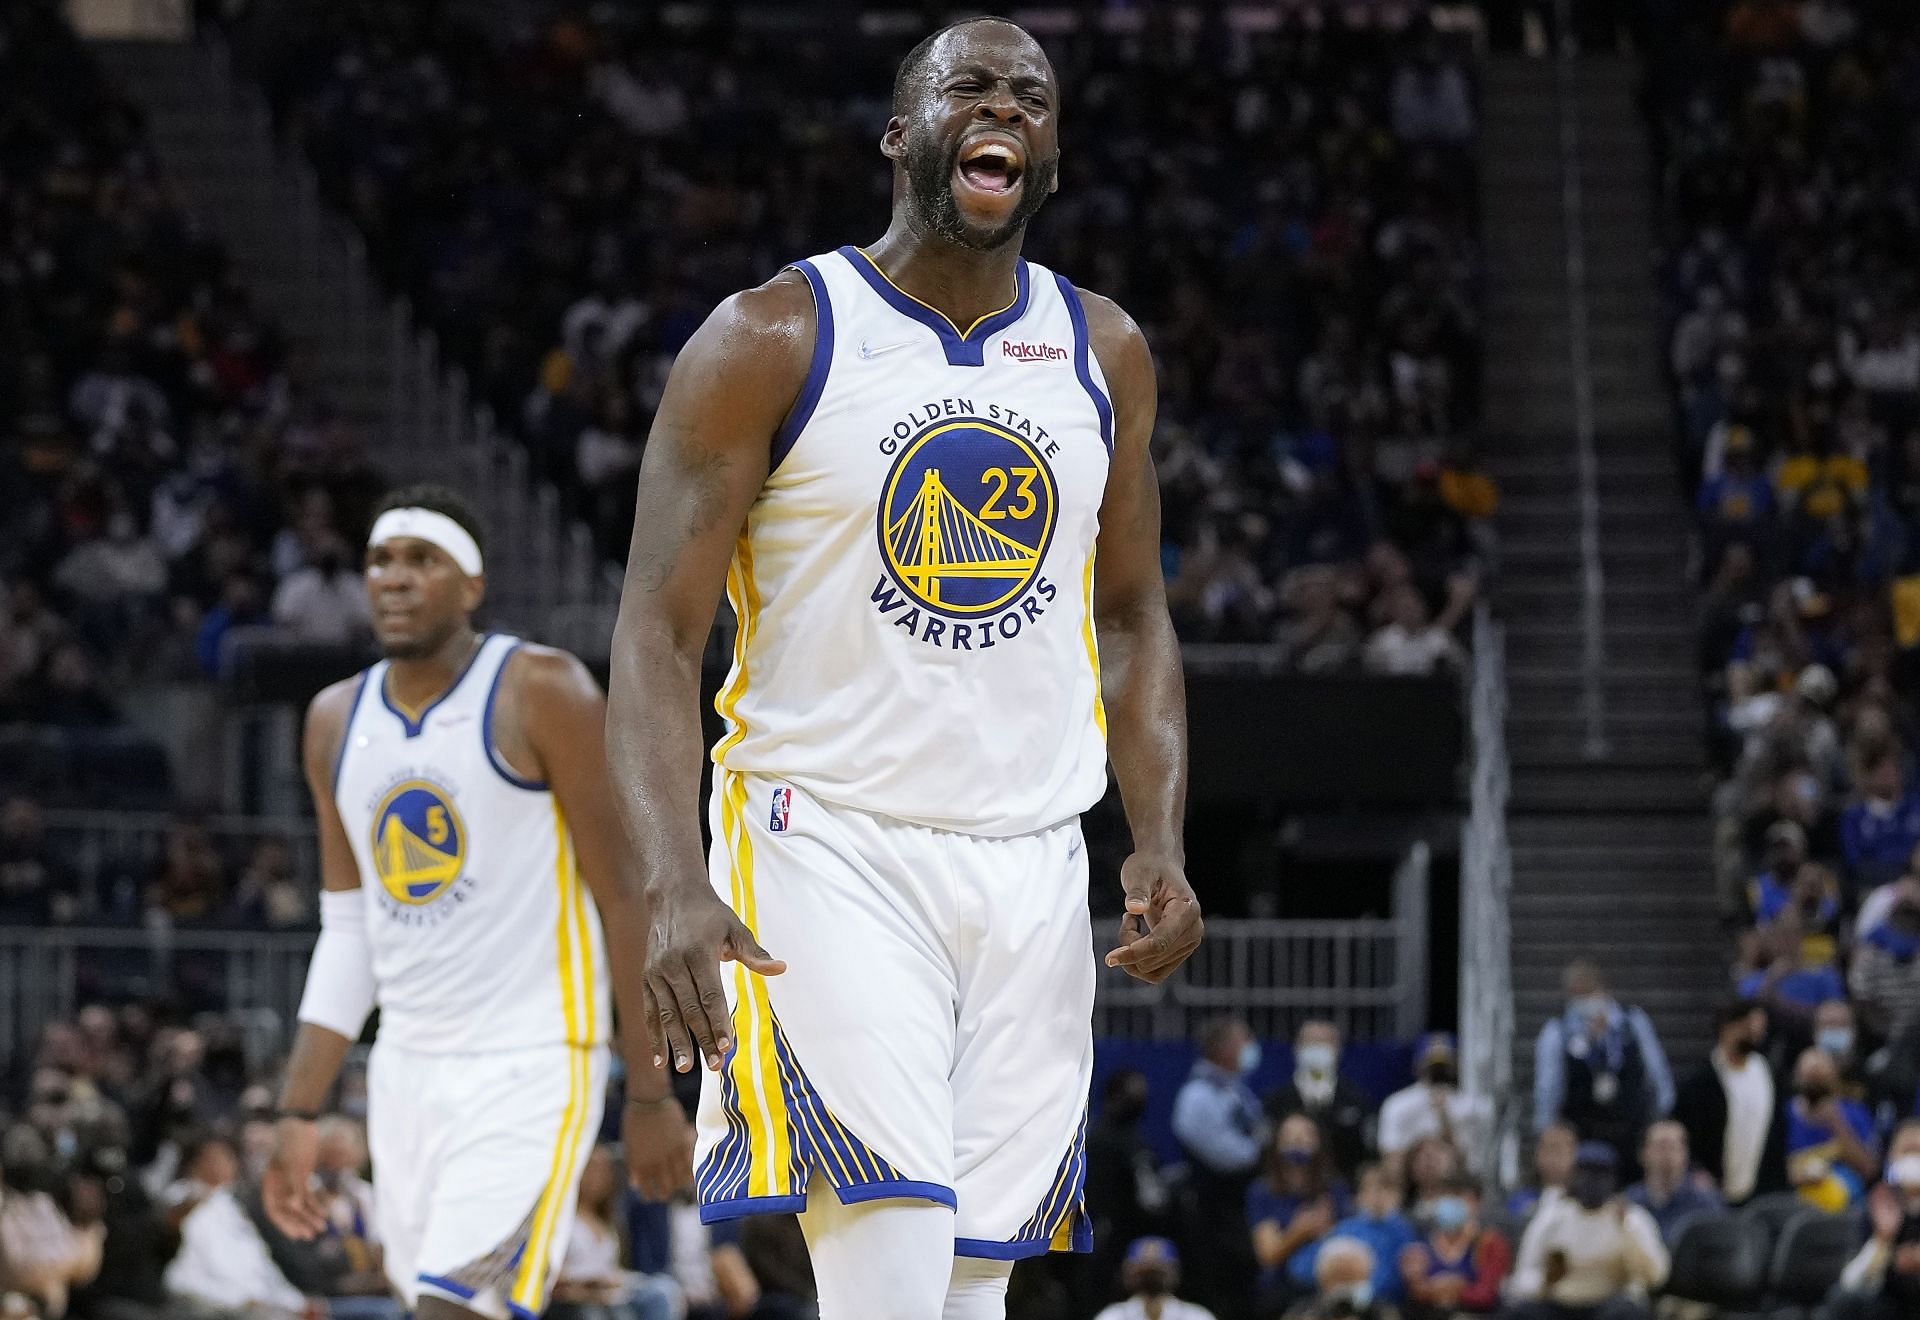 Draymond Green celebrates a play by the Golden State Warriors